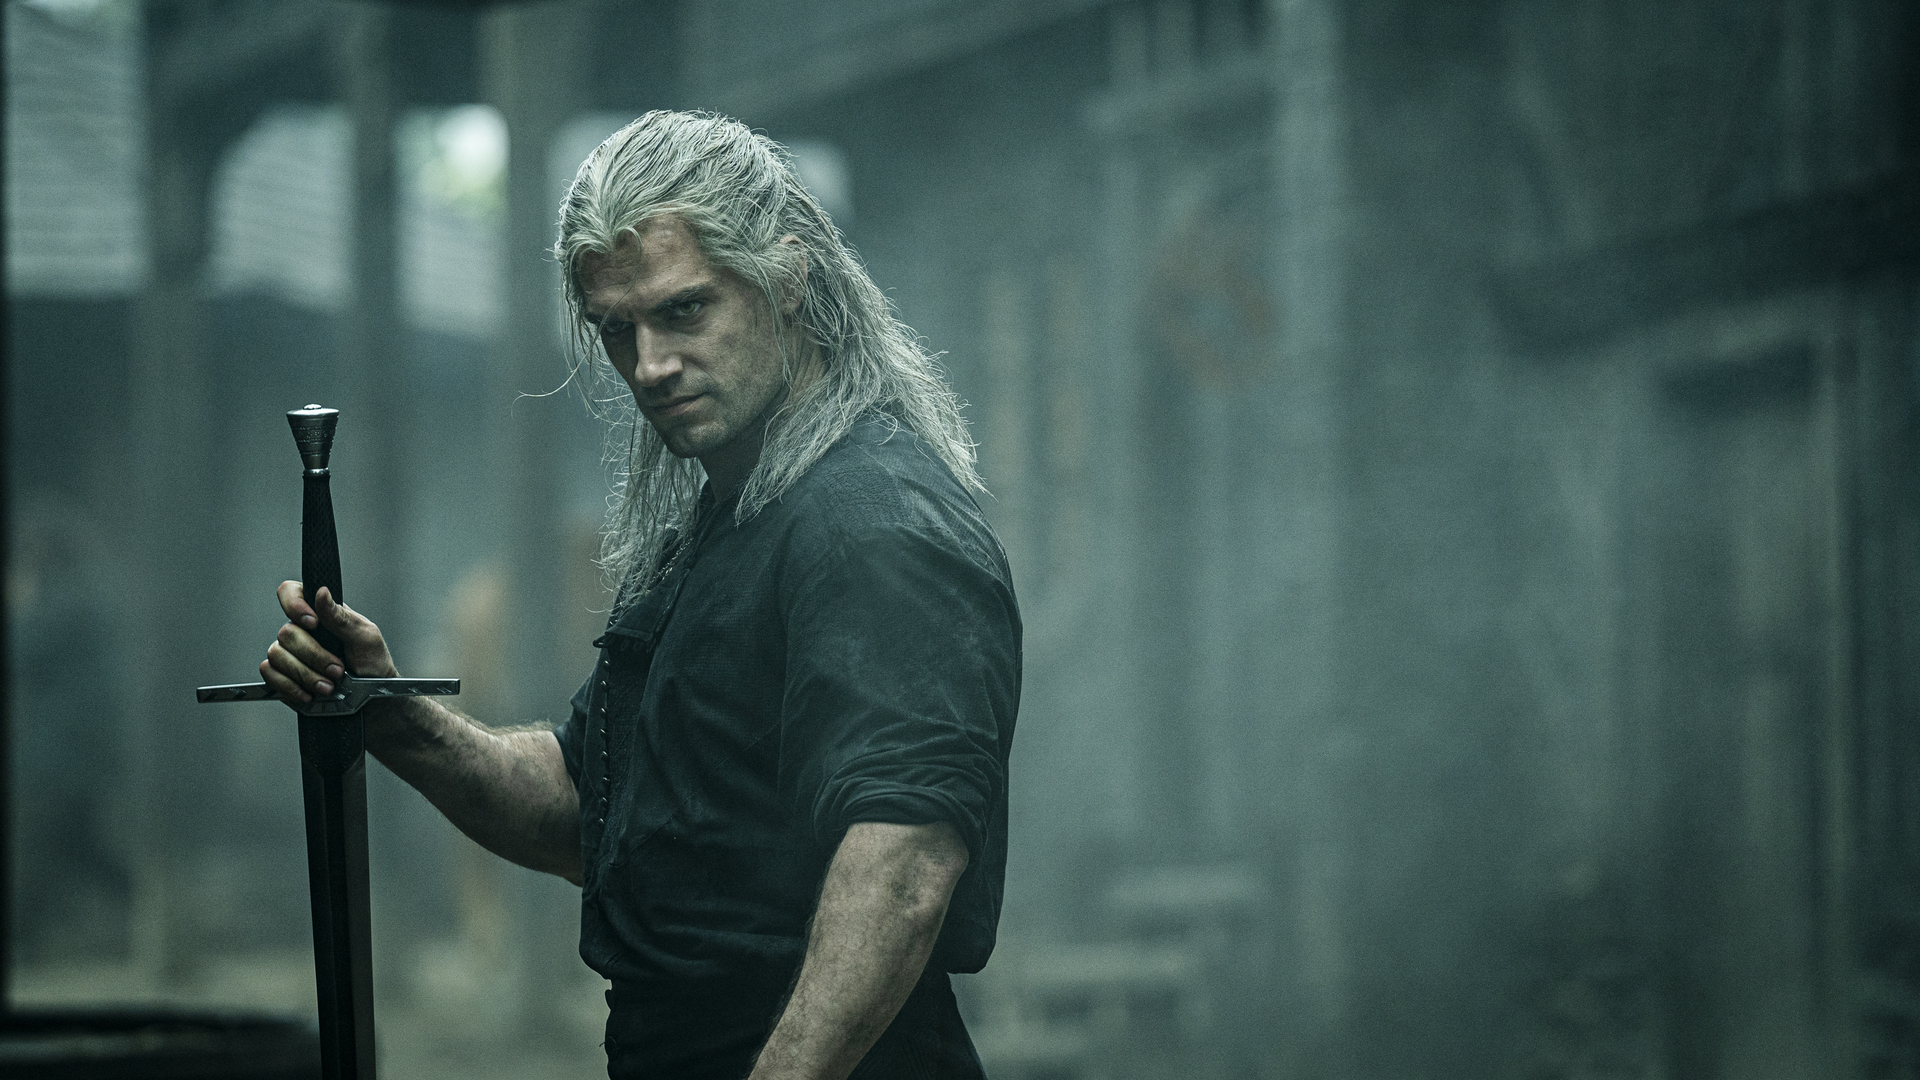 Henry Cavill as Geralt of Rivia in The Witcher (2019).